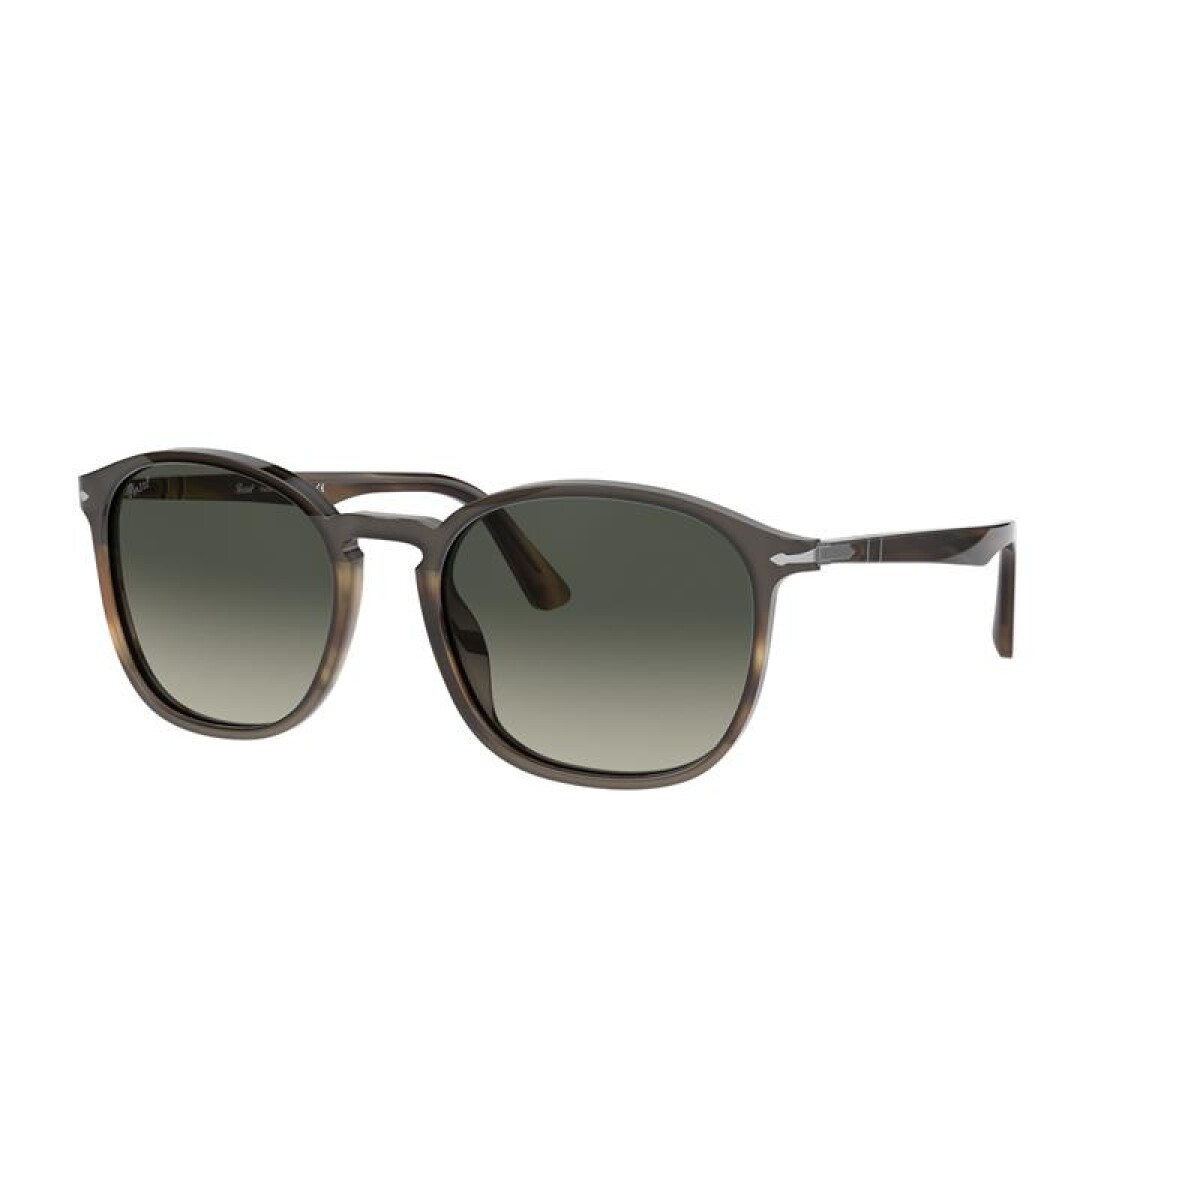 Persol 3215-s - 1135/71 